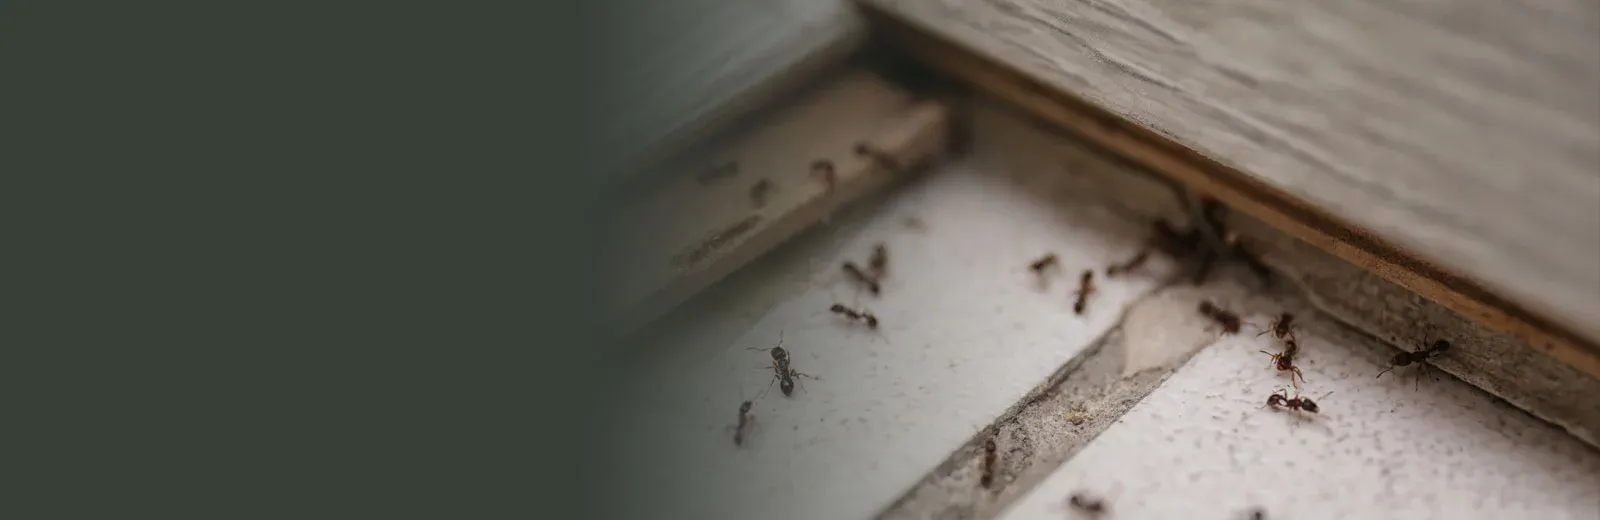 Ants crawling on floor of home